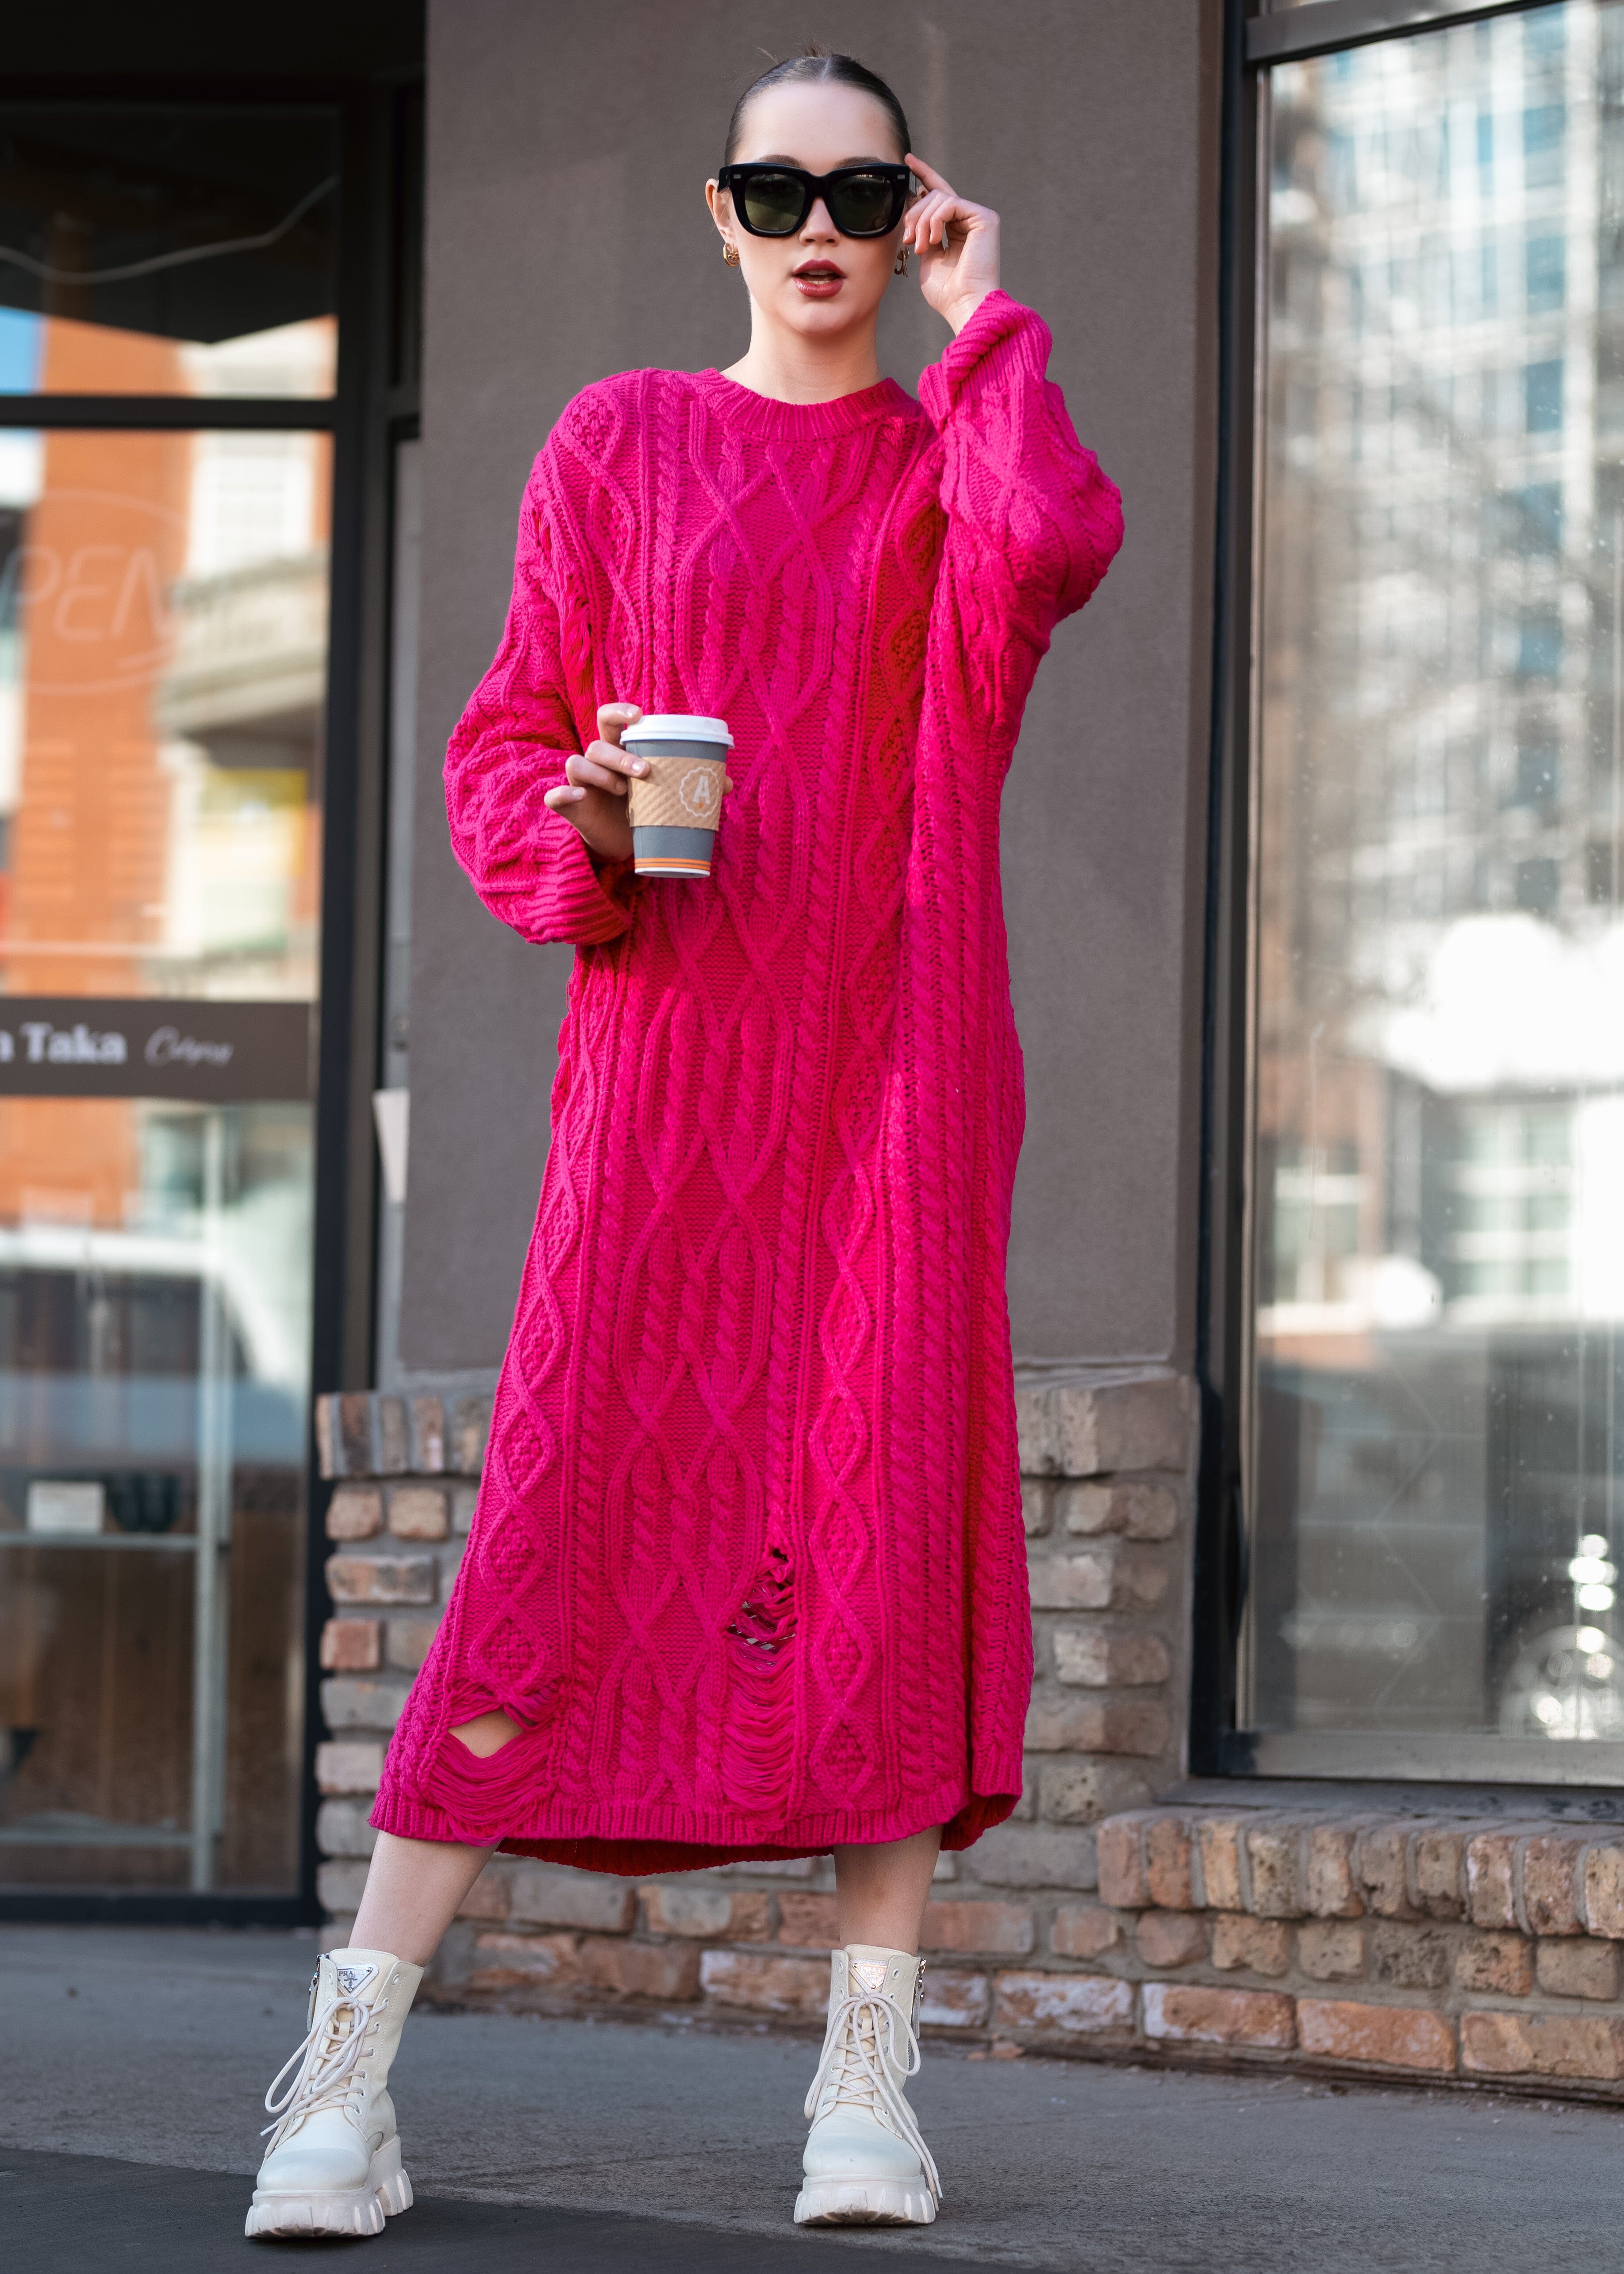 Long Distressed Cable Knit Dress - Kate Hewko